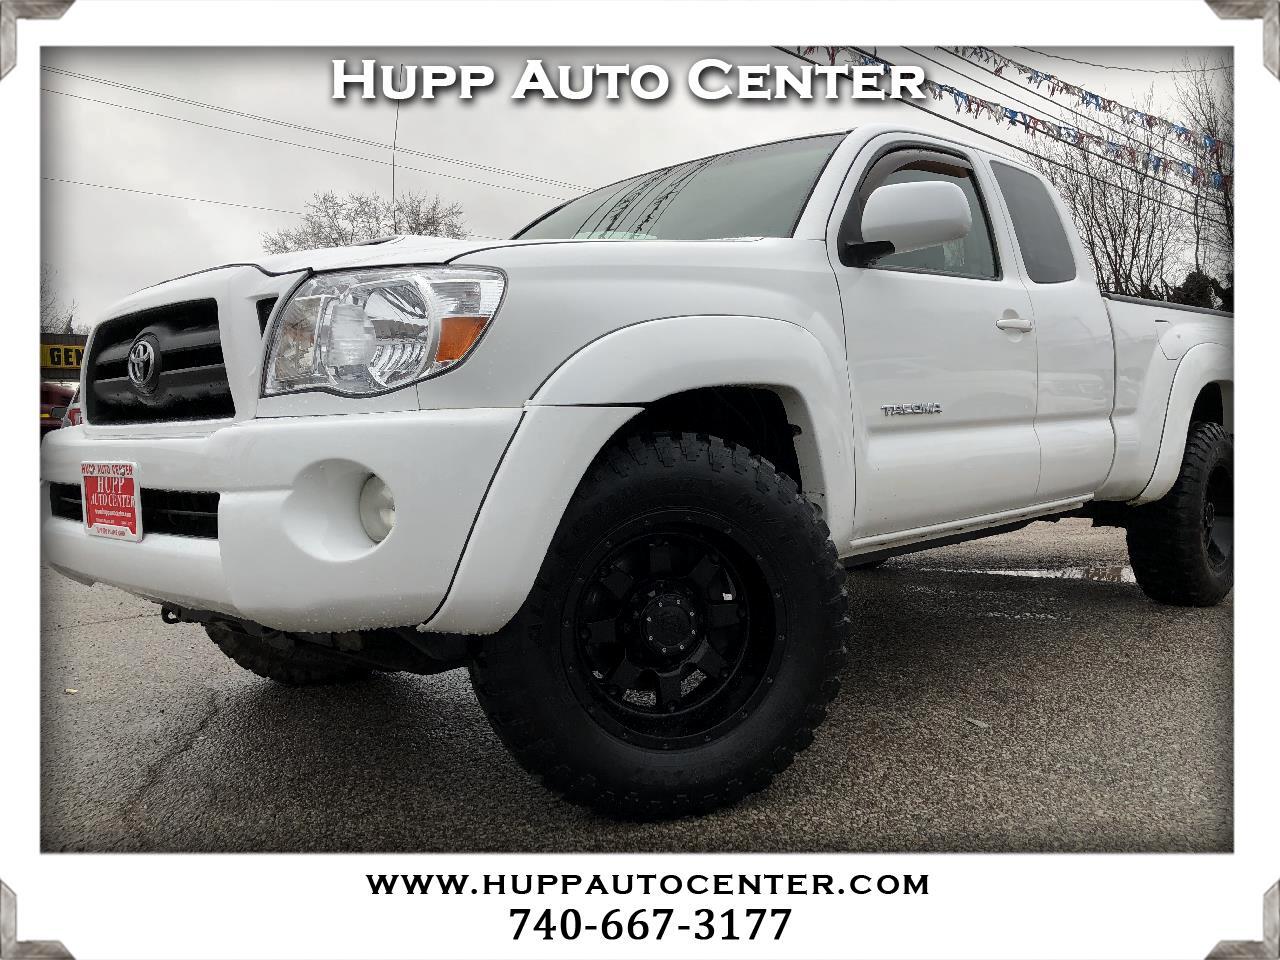 Used 2005 Toyota Tacoma Access Cab V6 Manual 4wd For Sale In